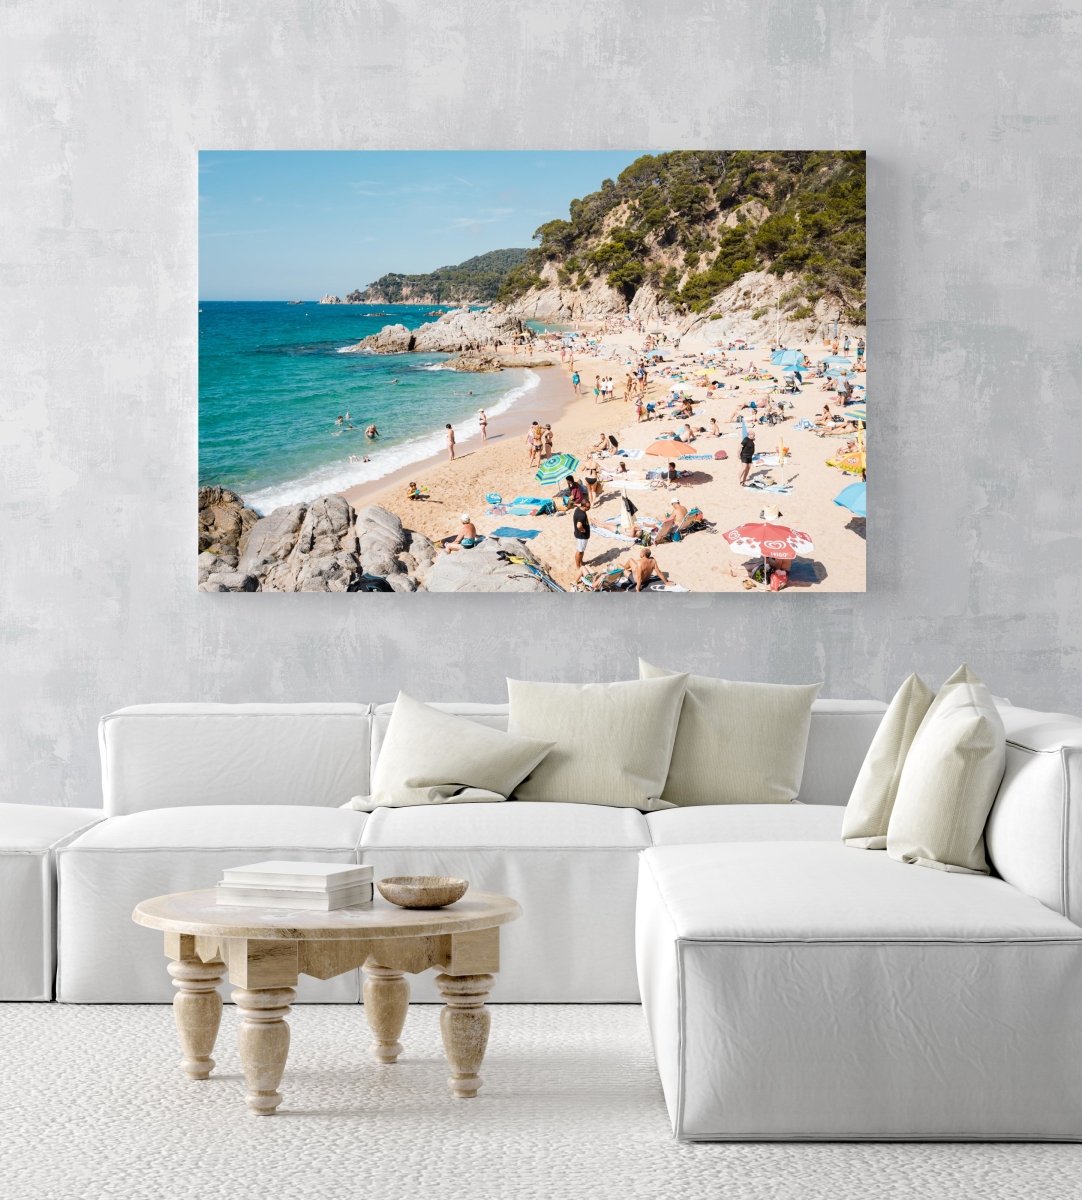 Packed beach along Costa Brava in an acrylic/perspex frame